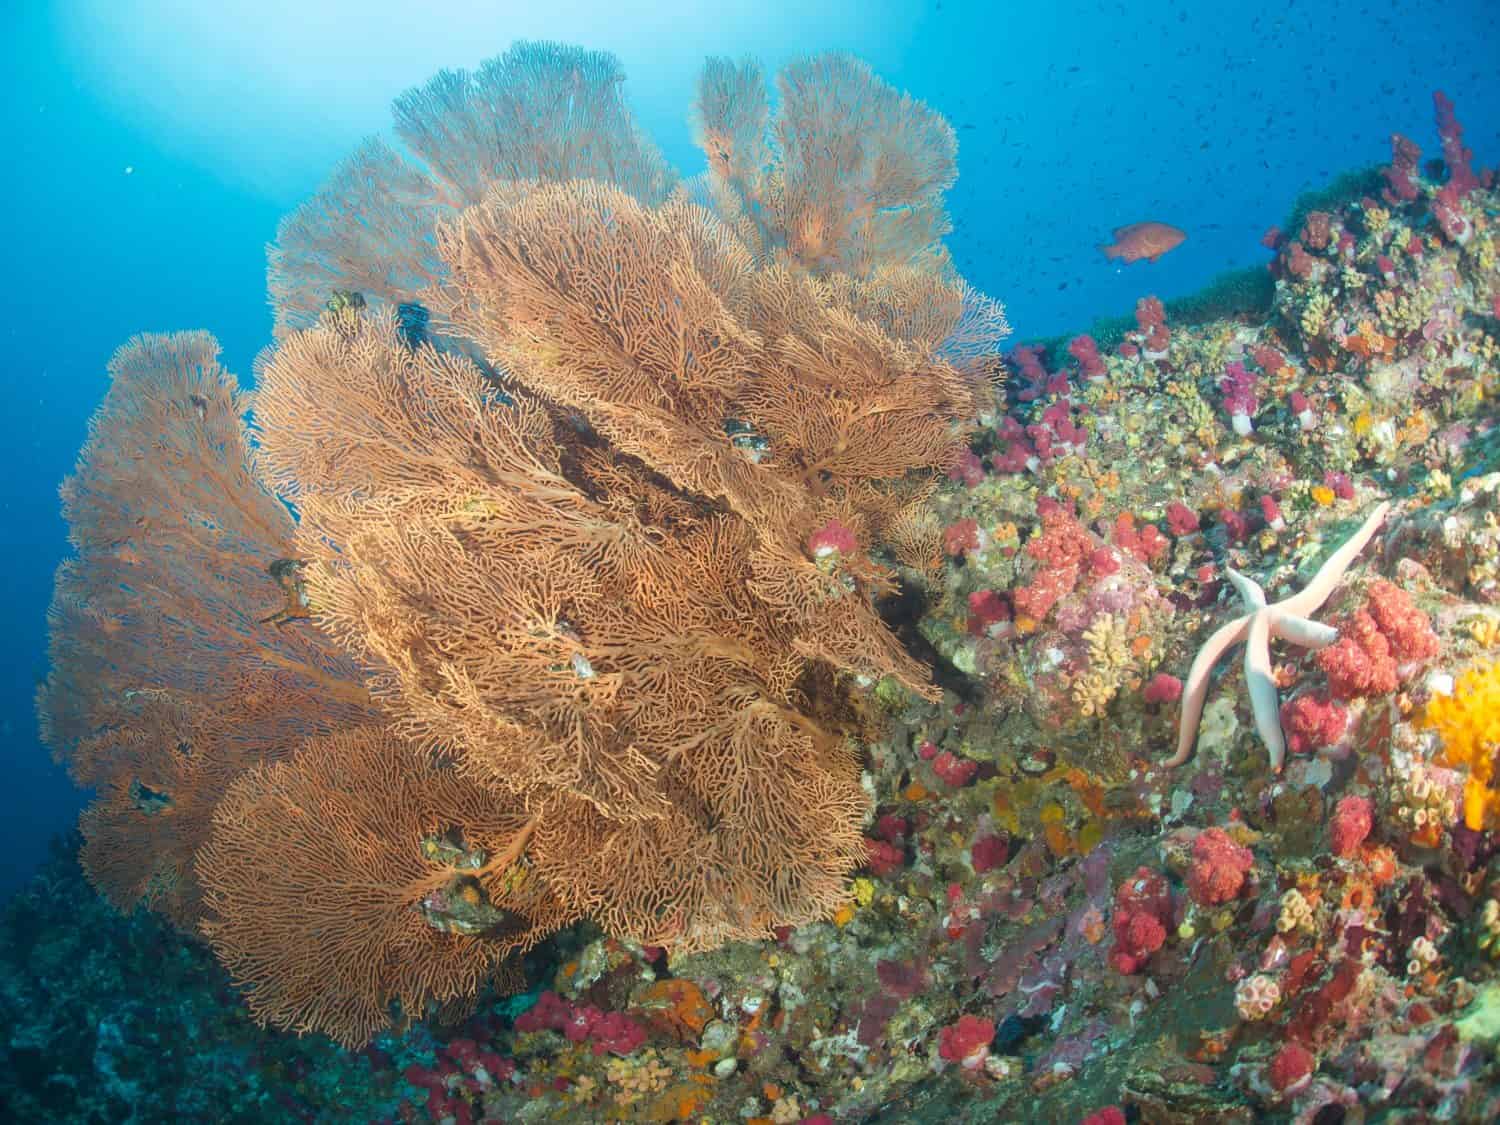 Giant Gorgonian Sea Fan Soft Corals Underwater. Coral Reef Life under Tropical Indo-Pacific Ocean.    